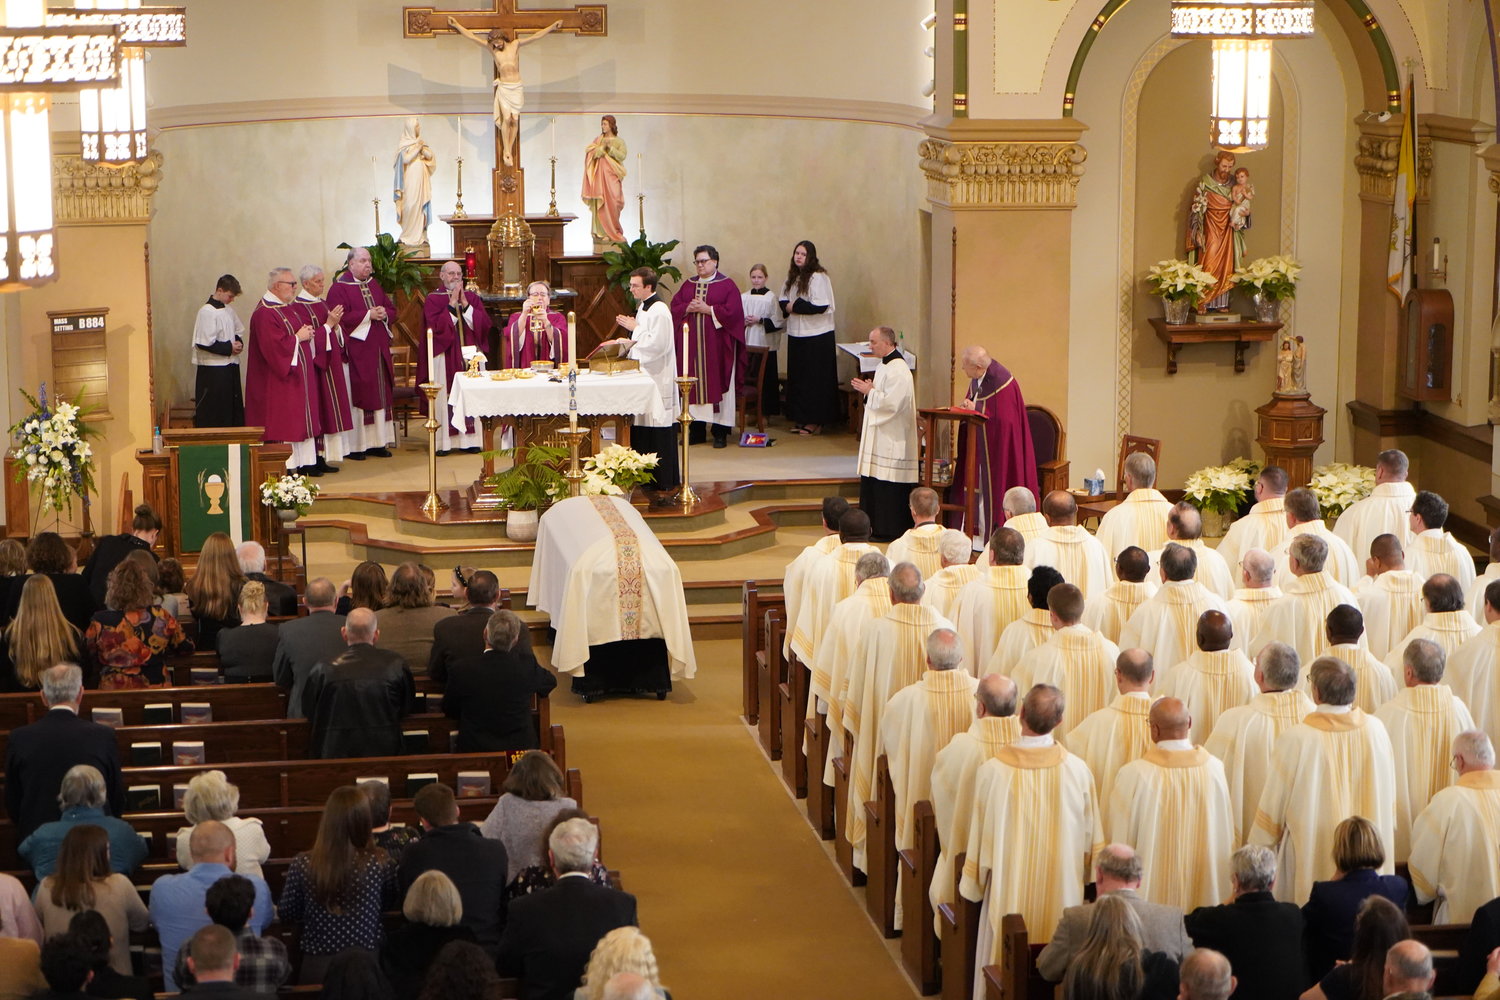 Priests of the Jefferson City diocese chant the ancient “Salve Regina” (“Hail, Holy Queen”) prayer seeking the Blessed Mother’s intercession as Fr. John Groner’s earthly remains are carried out of Immaculate Conception Church in Jefferson City after his Funeral Mass on Jan. 16.